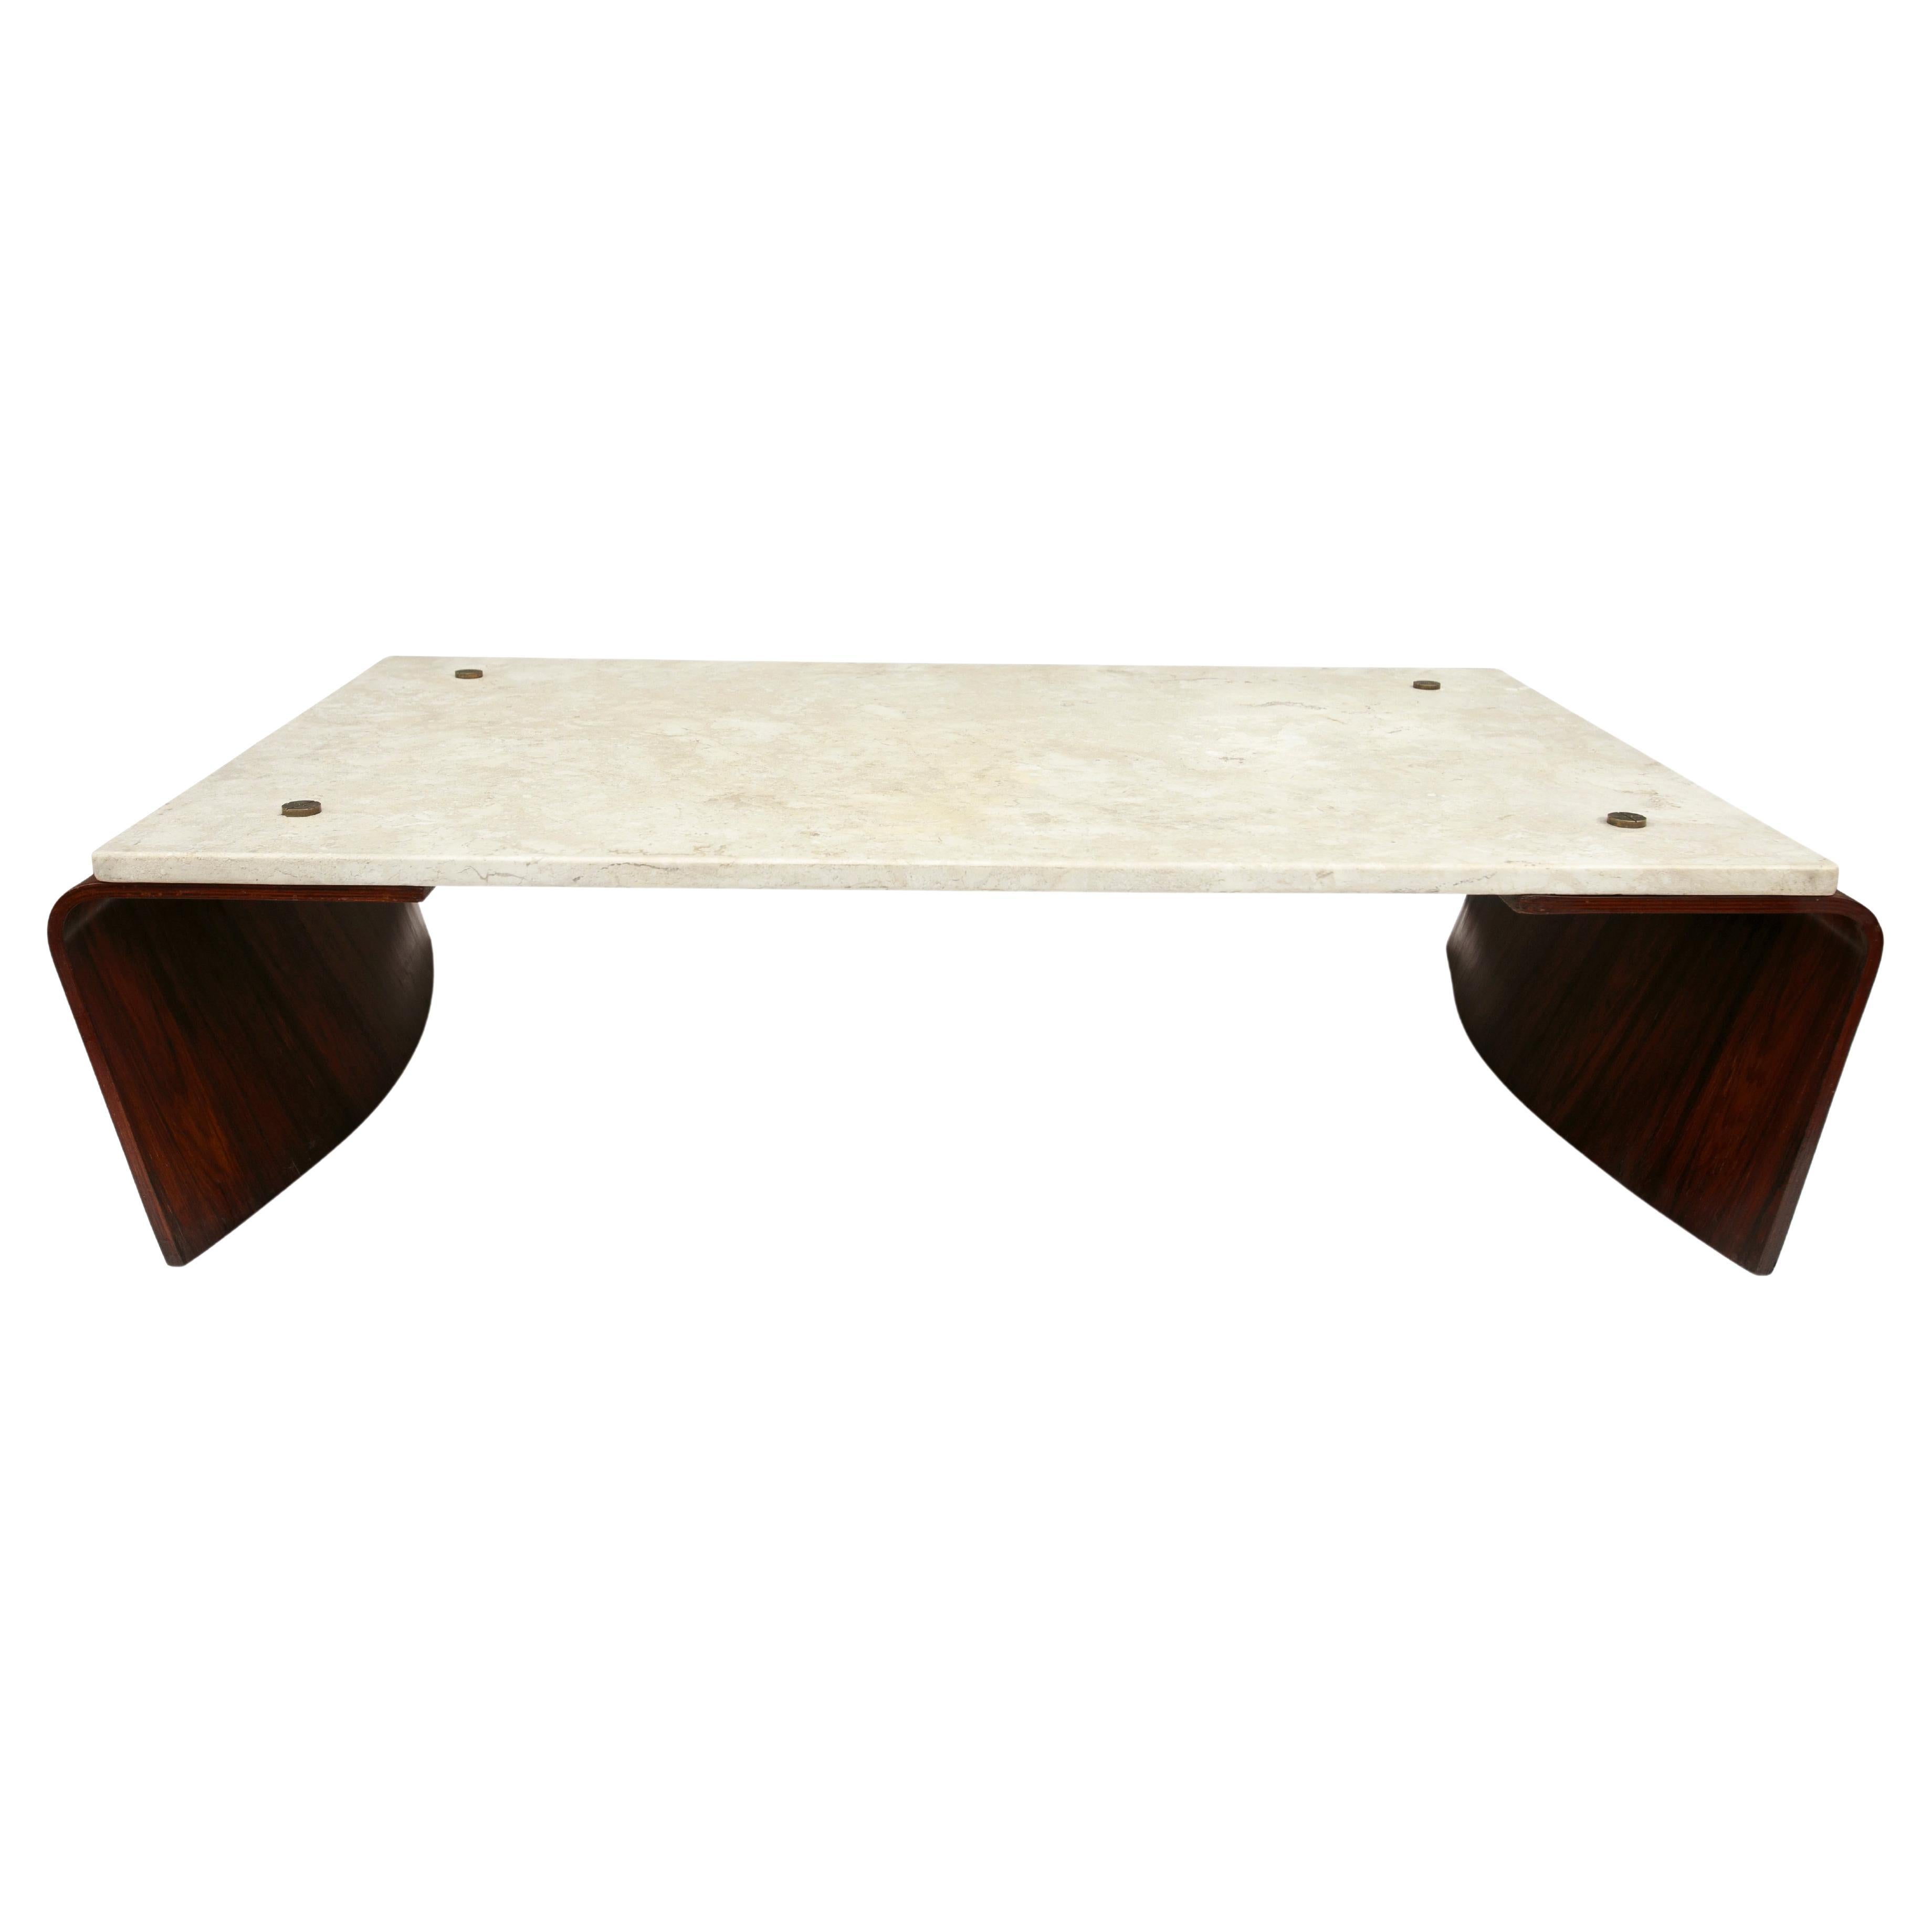 Available today, this “Romana” coffee table, designed by Jorge Zalsziupin in 1959, is nothing less than spectacular. The Romana coffee table is a stunning example of minimalist design. Its use of materials - including curved rosewood legs and a